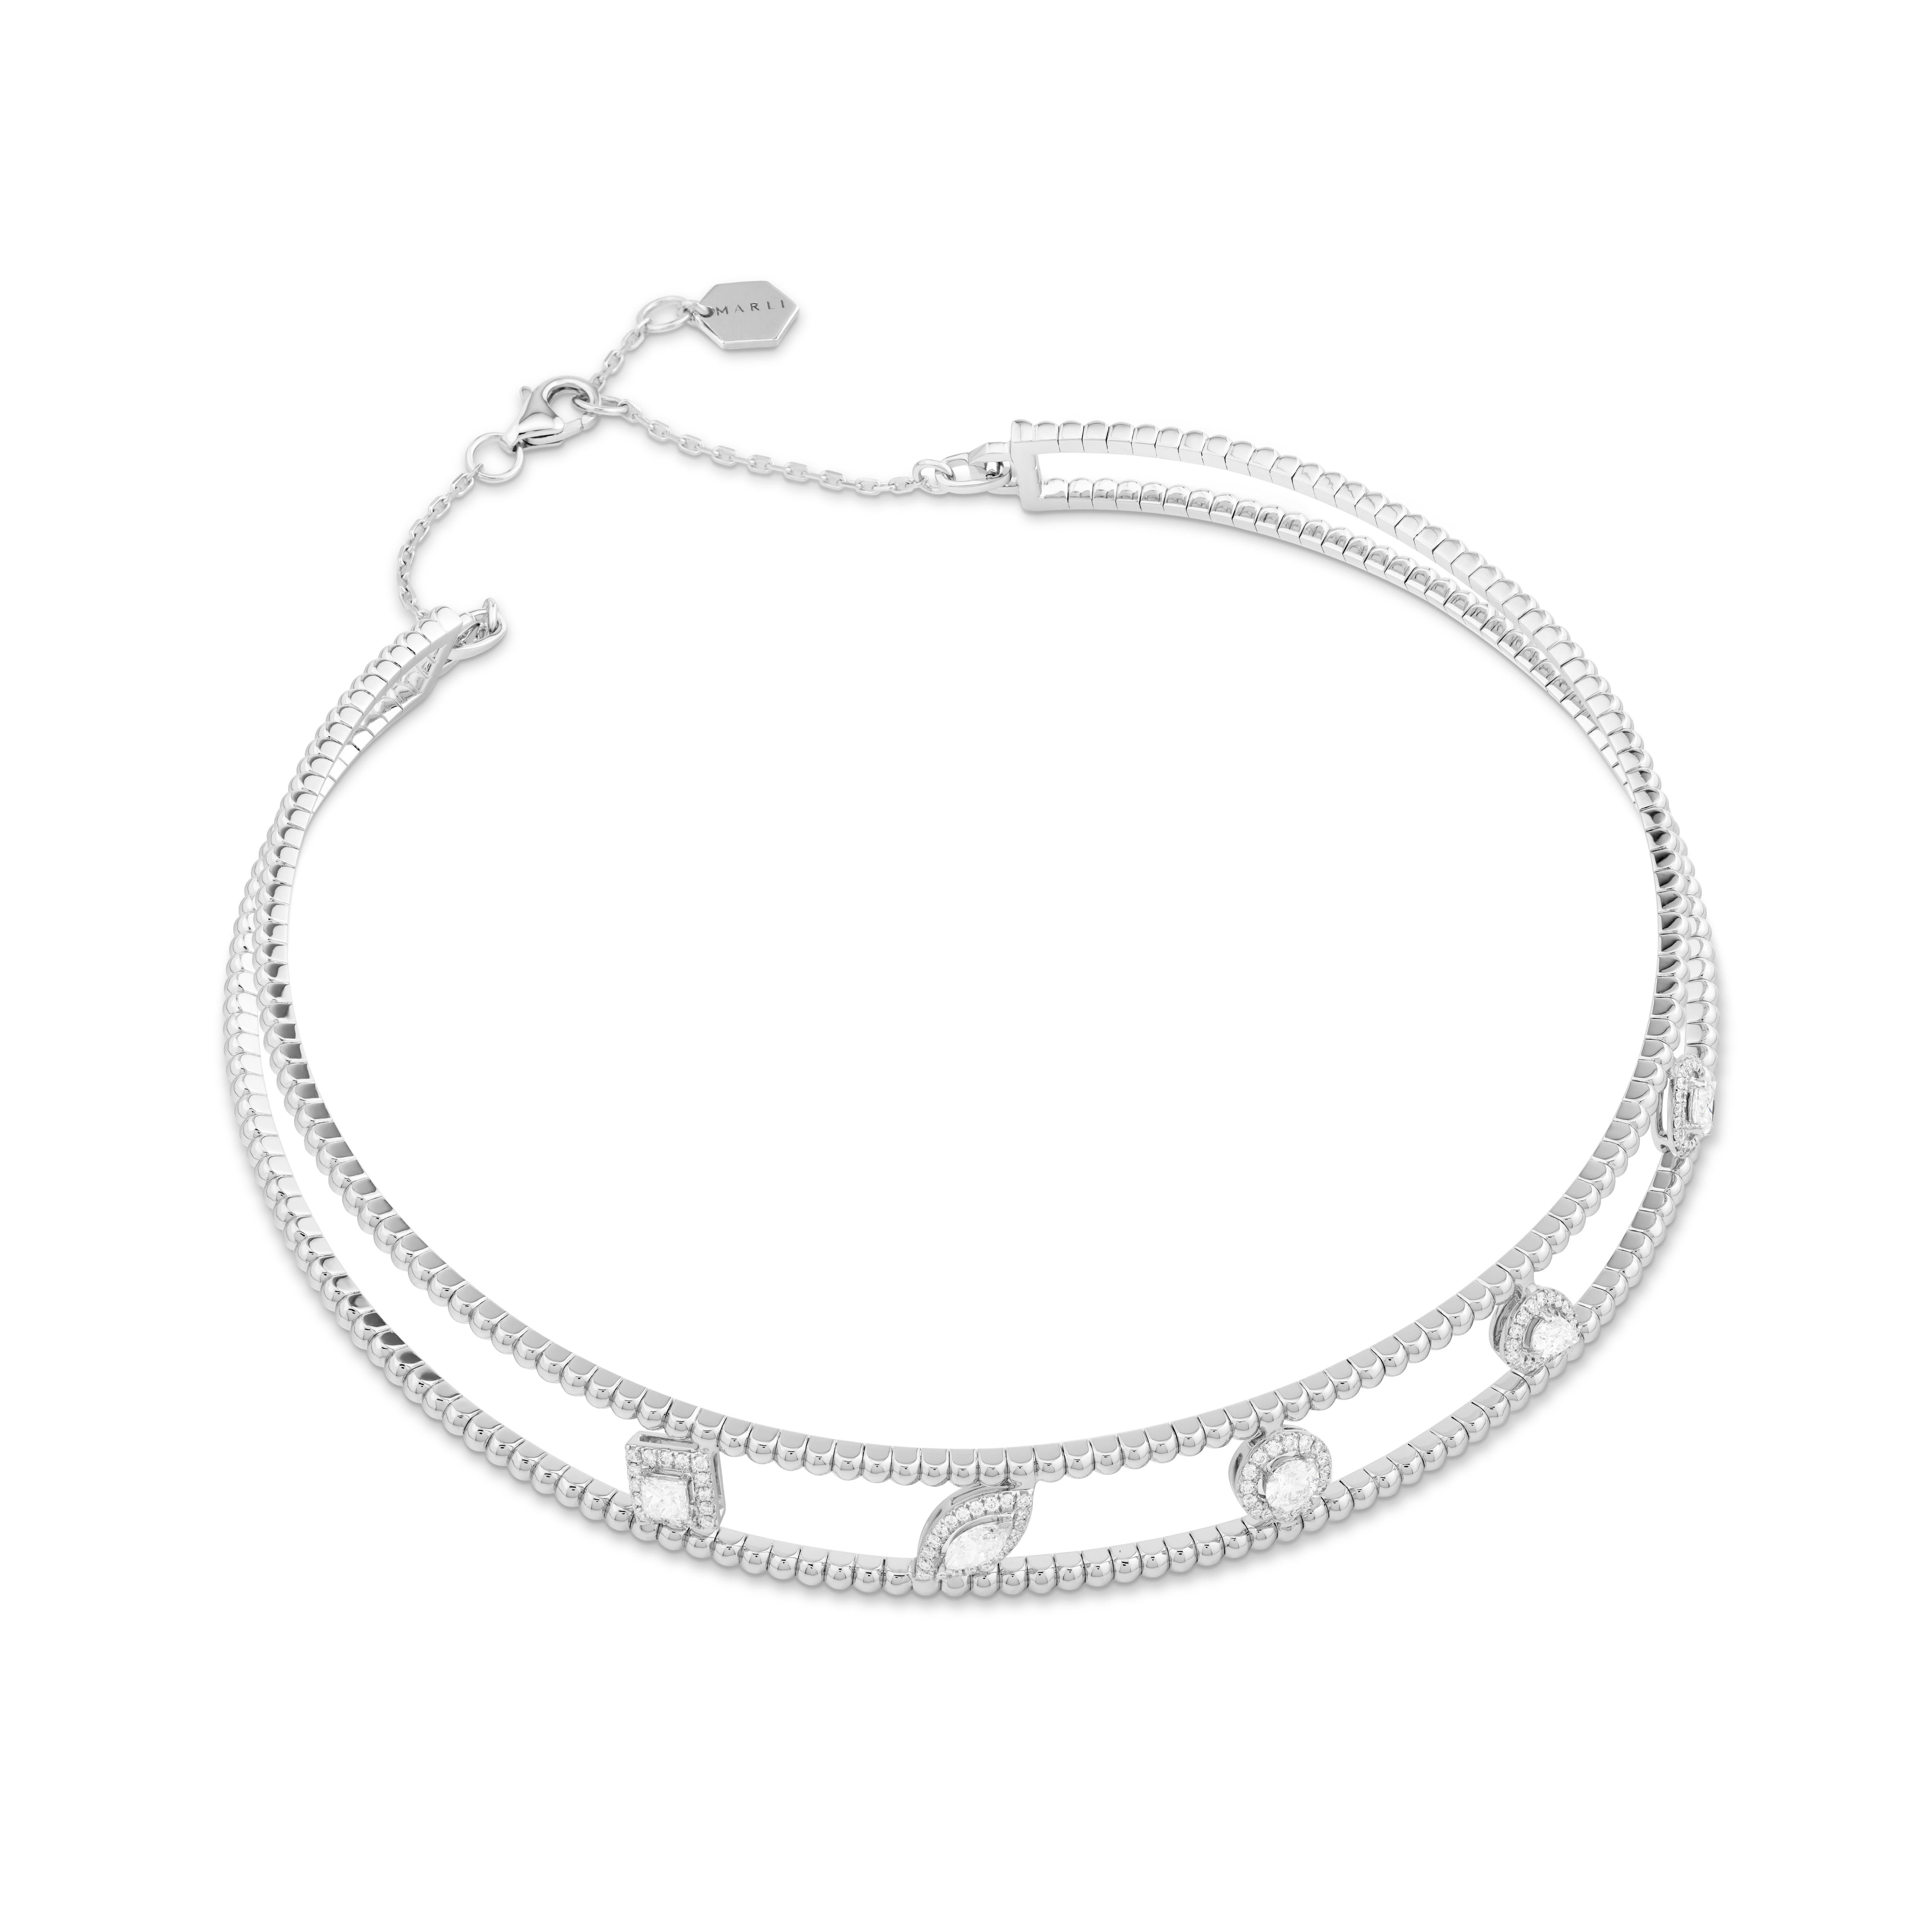 The Rock Statement Slip-On Collar is the perfect piece for a contemporary lifestyle. Designed with 5 brilliant-cut diamond, this choker evokes a youthful, yet sensual vibe. Inspired by the playful flavor of rock candy treats, the various shapes and